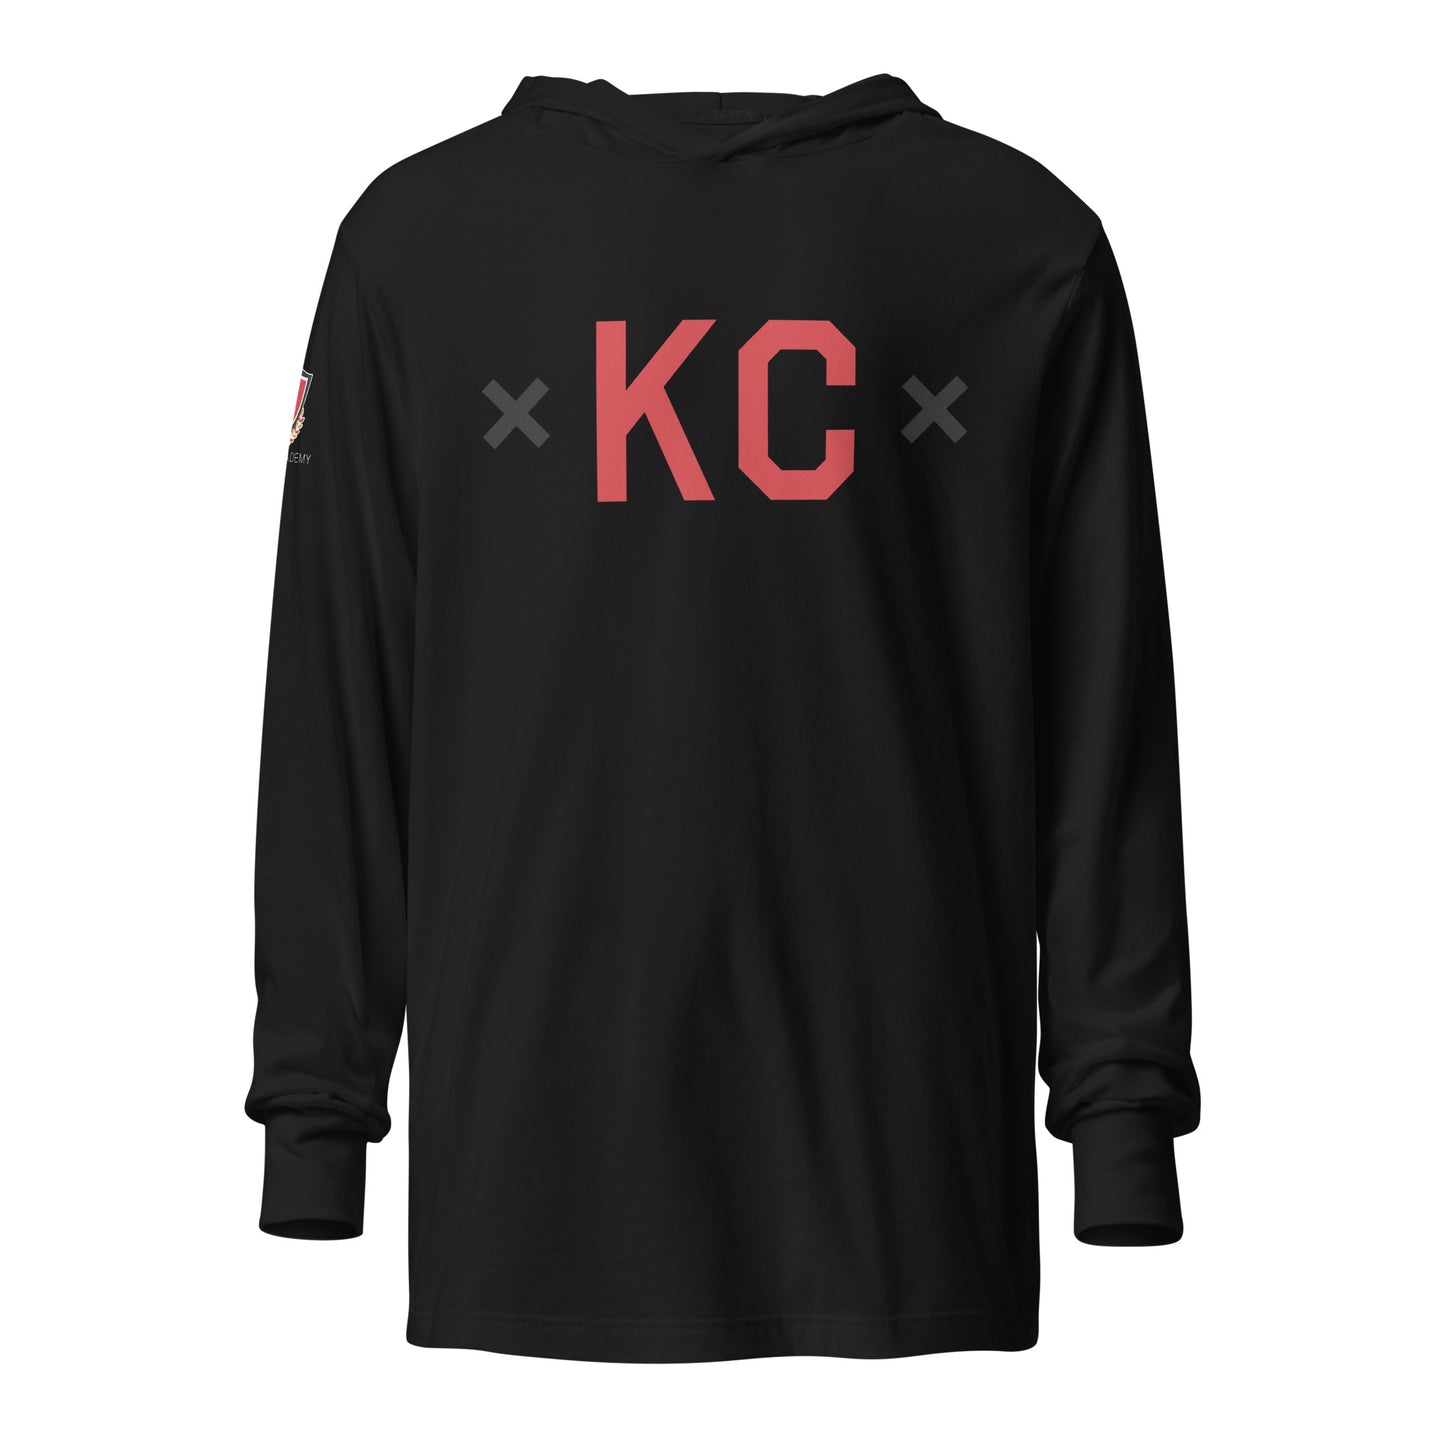 Signature KC Adult Hooded T-Shirt - Plaza Academy X MADE MOBB